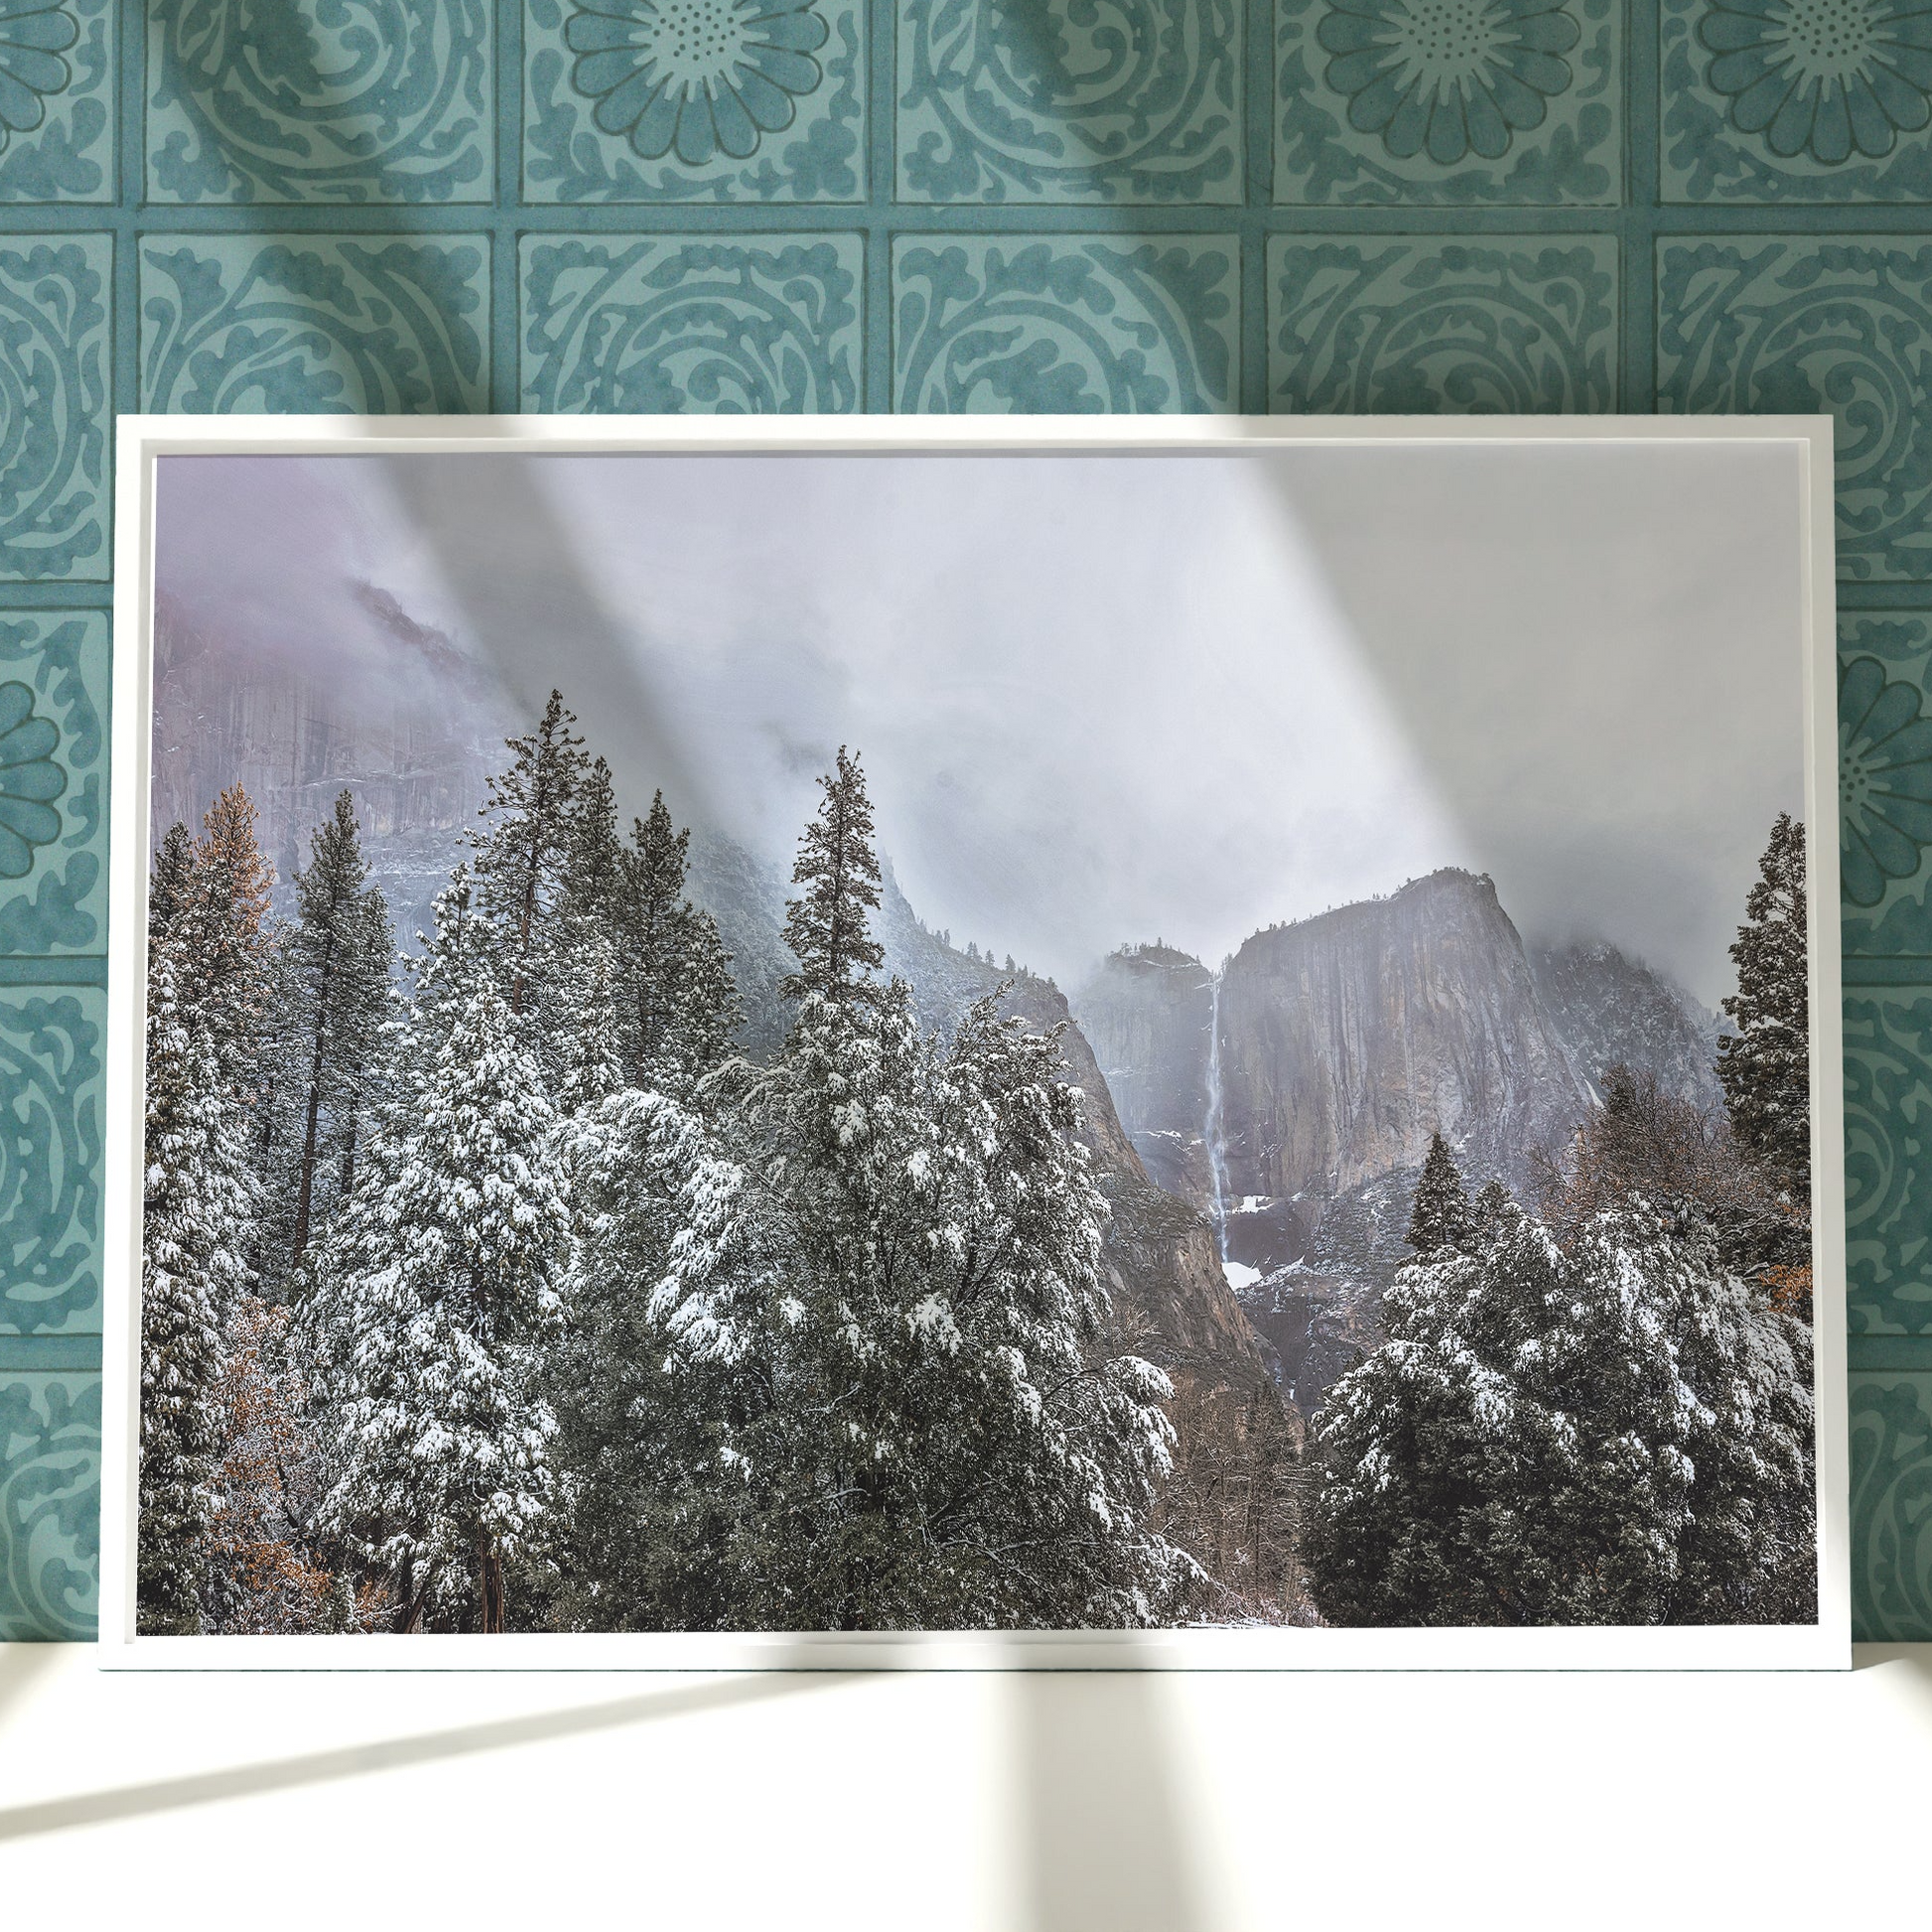 a picture of a snowy mountain with trees in the foreground